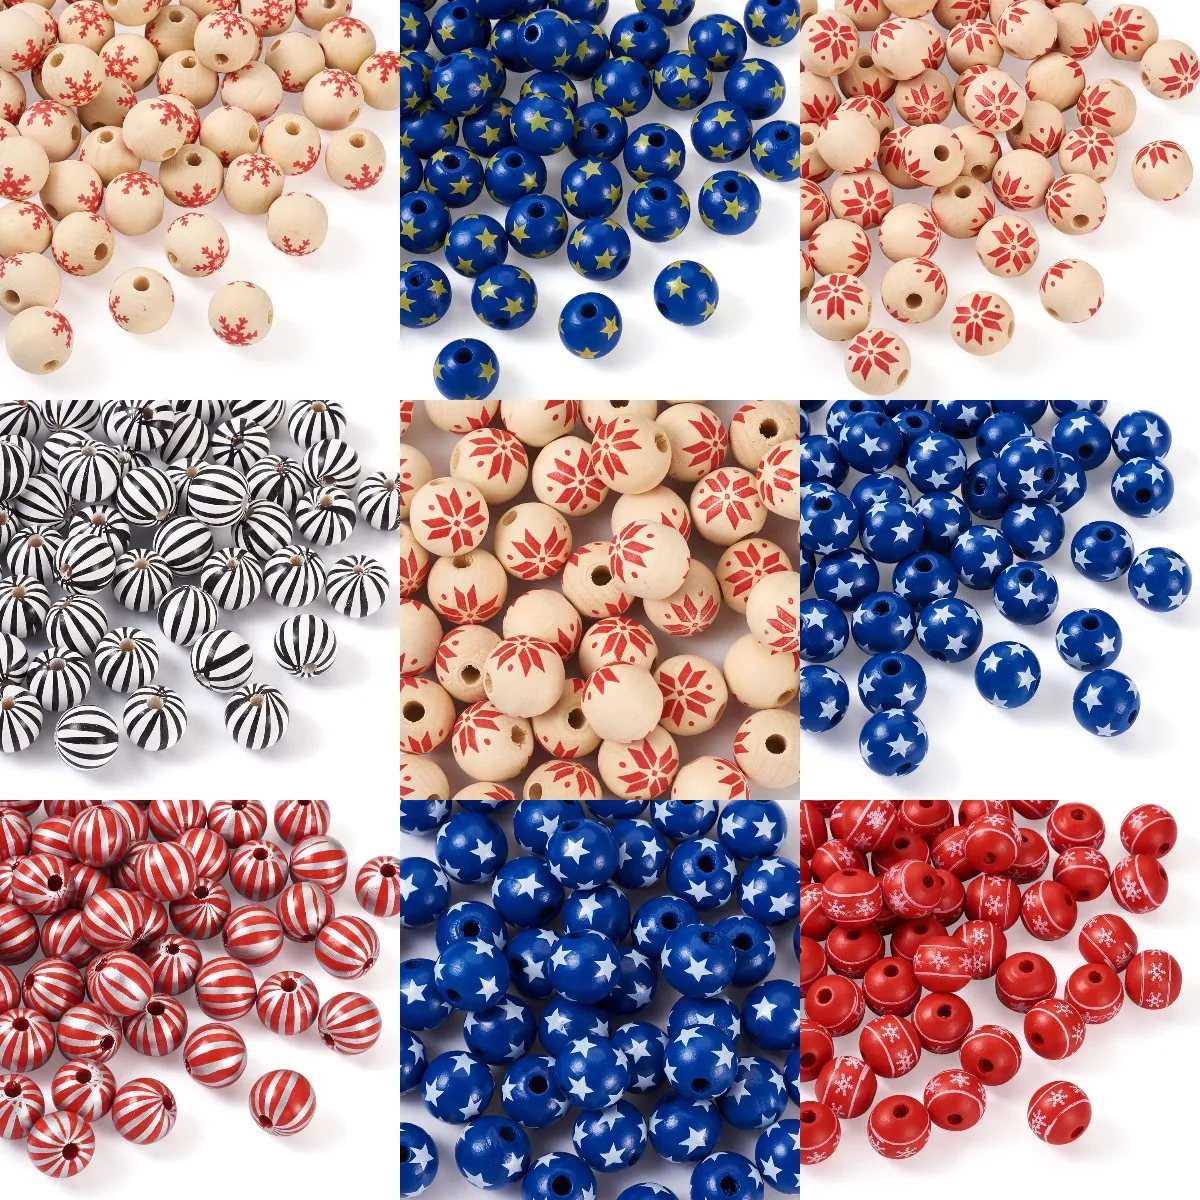 

50Pcs 16MM Christmas Snowflake Star Printed Wooden Round Beads Natural Wood Spacer Bead For Bracelet DIY Craft Jewelry Making